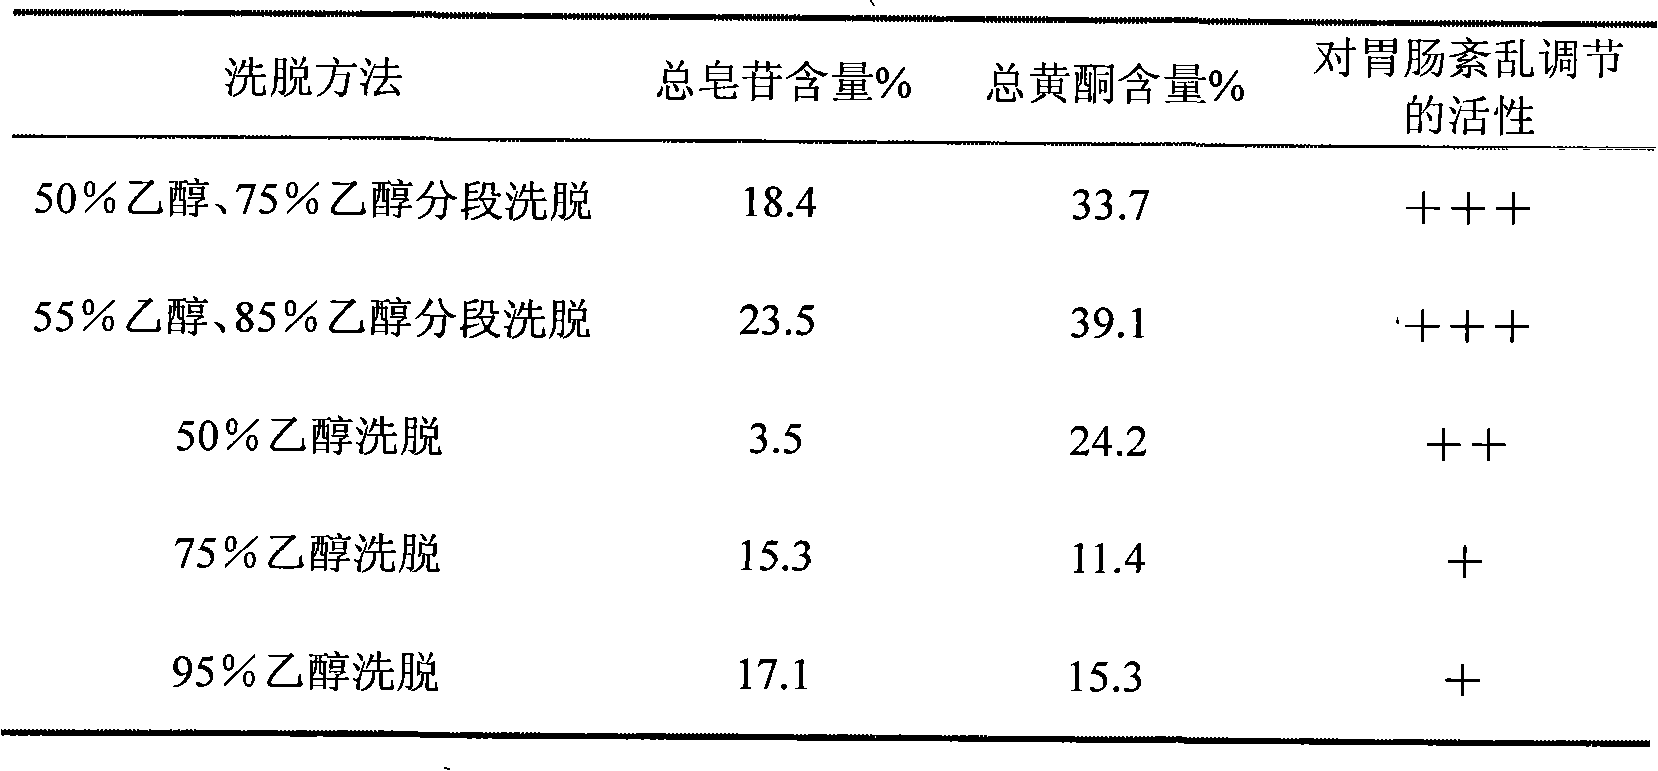 Composition for curing gastrointestinal functional disorders, preparation method thereof and application thereof in preparing drugs for curing gastrointestinal functional disorders